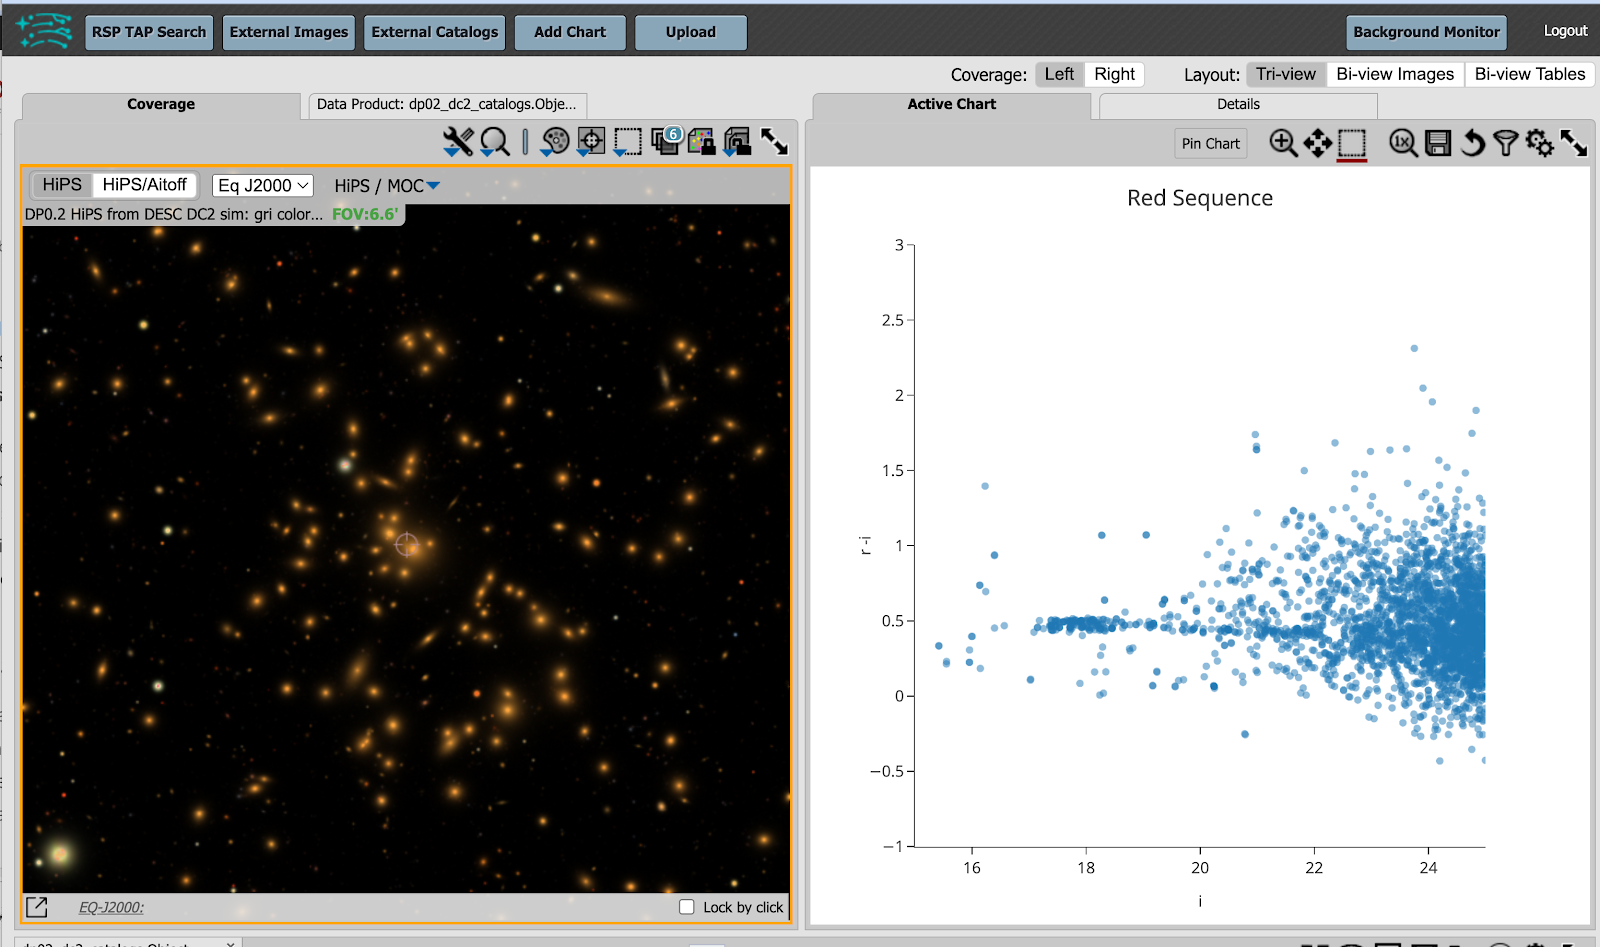 A screenshot of the Portal Aspect of the Rubin Science Platform with two panels. The left panel shows a galaxy cluster from the DC2 simulation and the right panel plots the cluster "red sequence" as an "r-i" vs "i" color-magnitude plot.